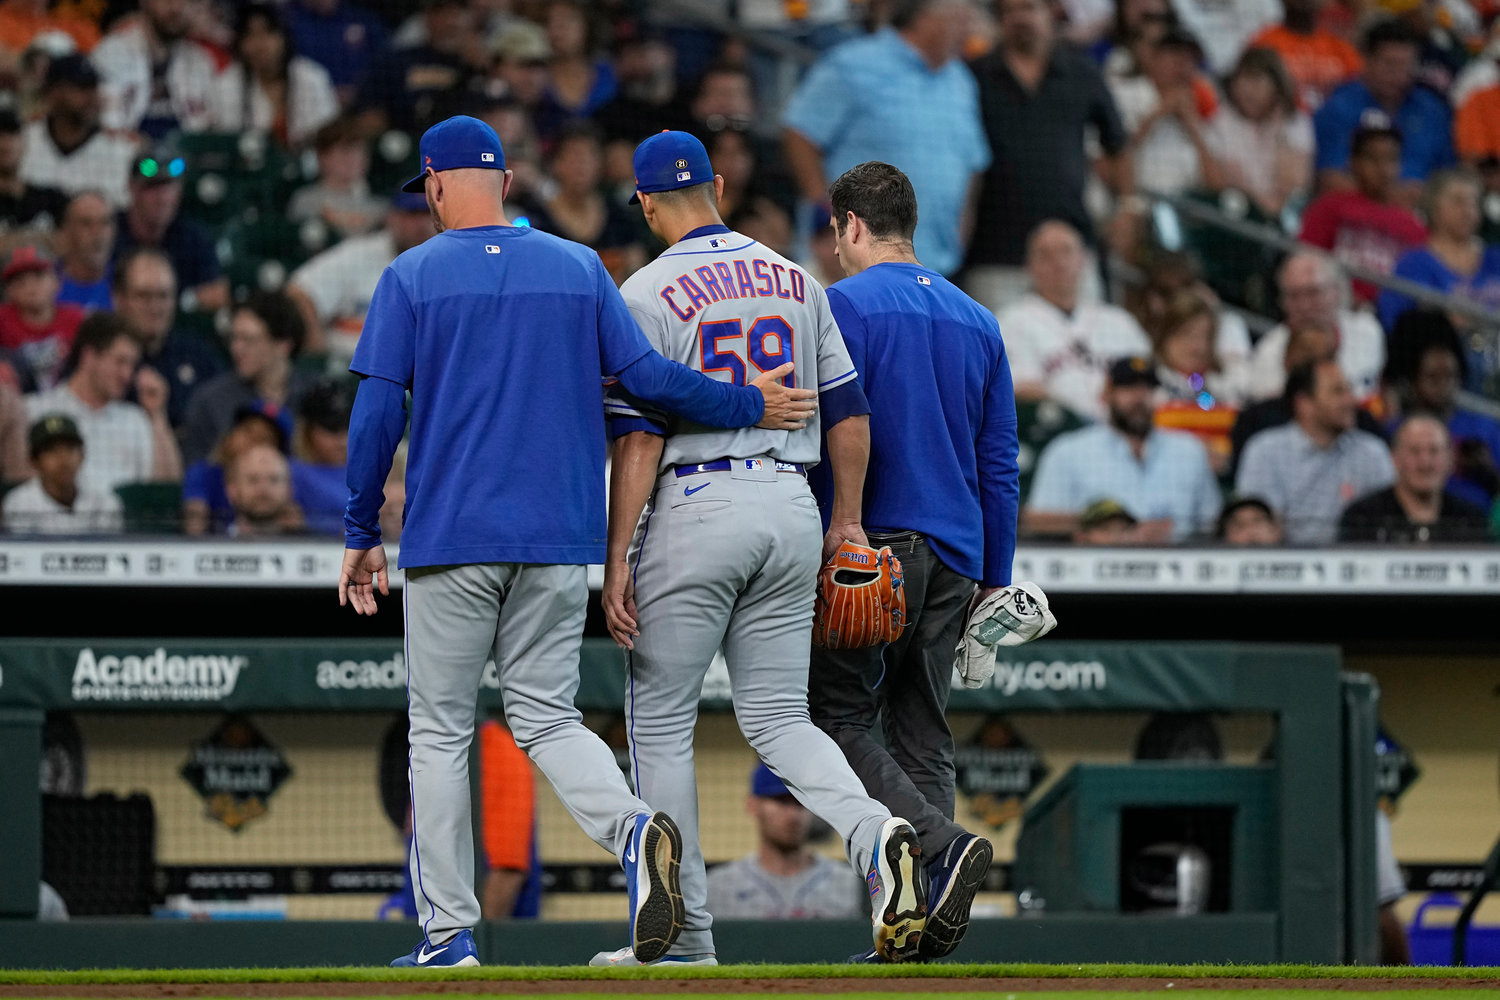 New York Mets starting pitcher Carlos Carrasco (59) leaves the field during the third inning of a game against the Houston Astros on Wednesday afternoon in Houston. The Mets lost 5-3.